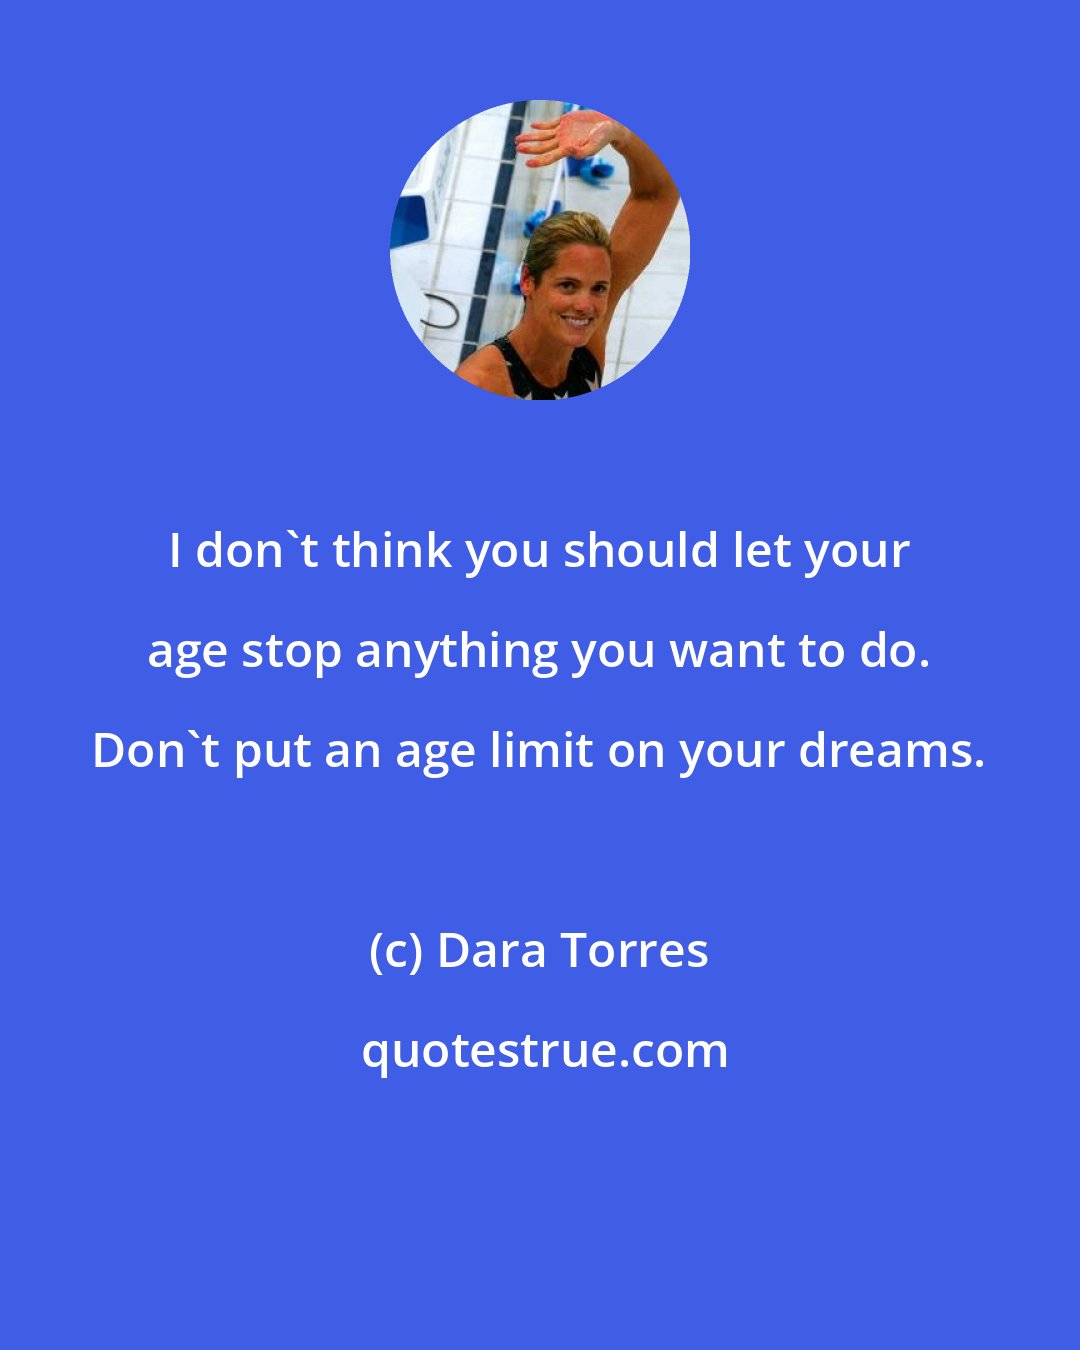 Dara Torres: I don't think you should let your age stop anything you want to do. Don't put an age limit on your dreams.